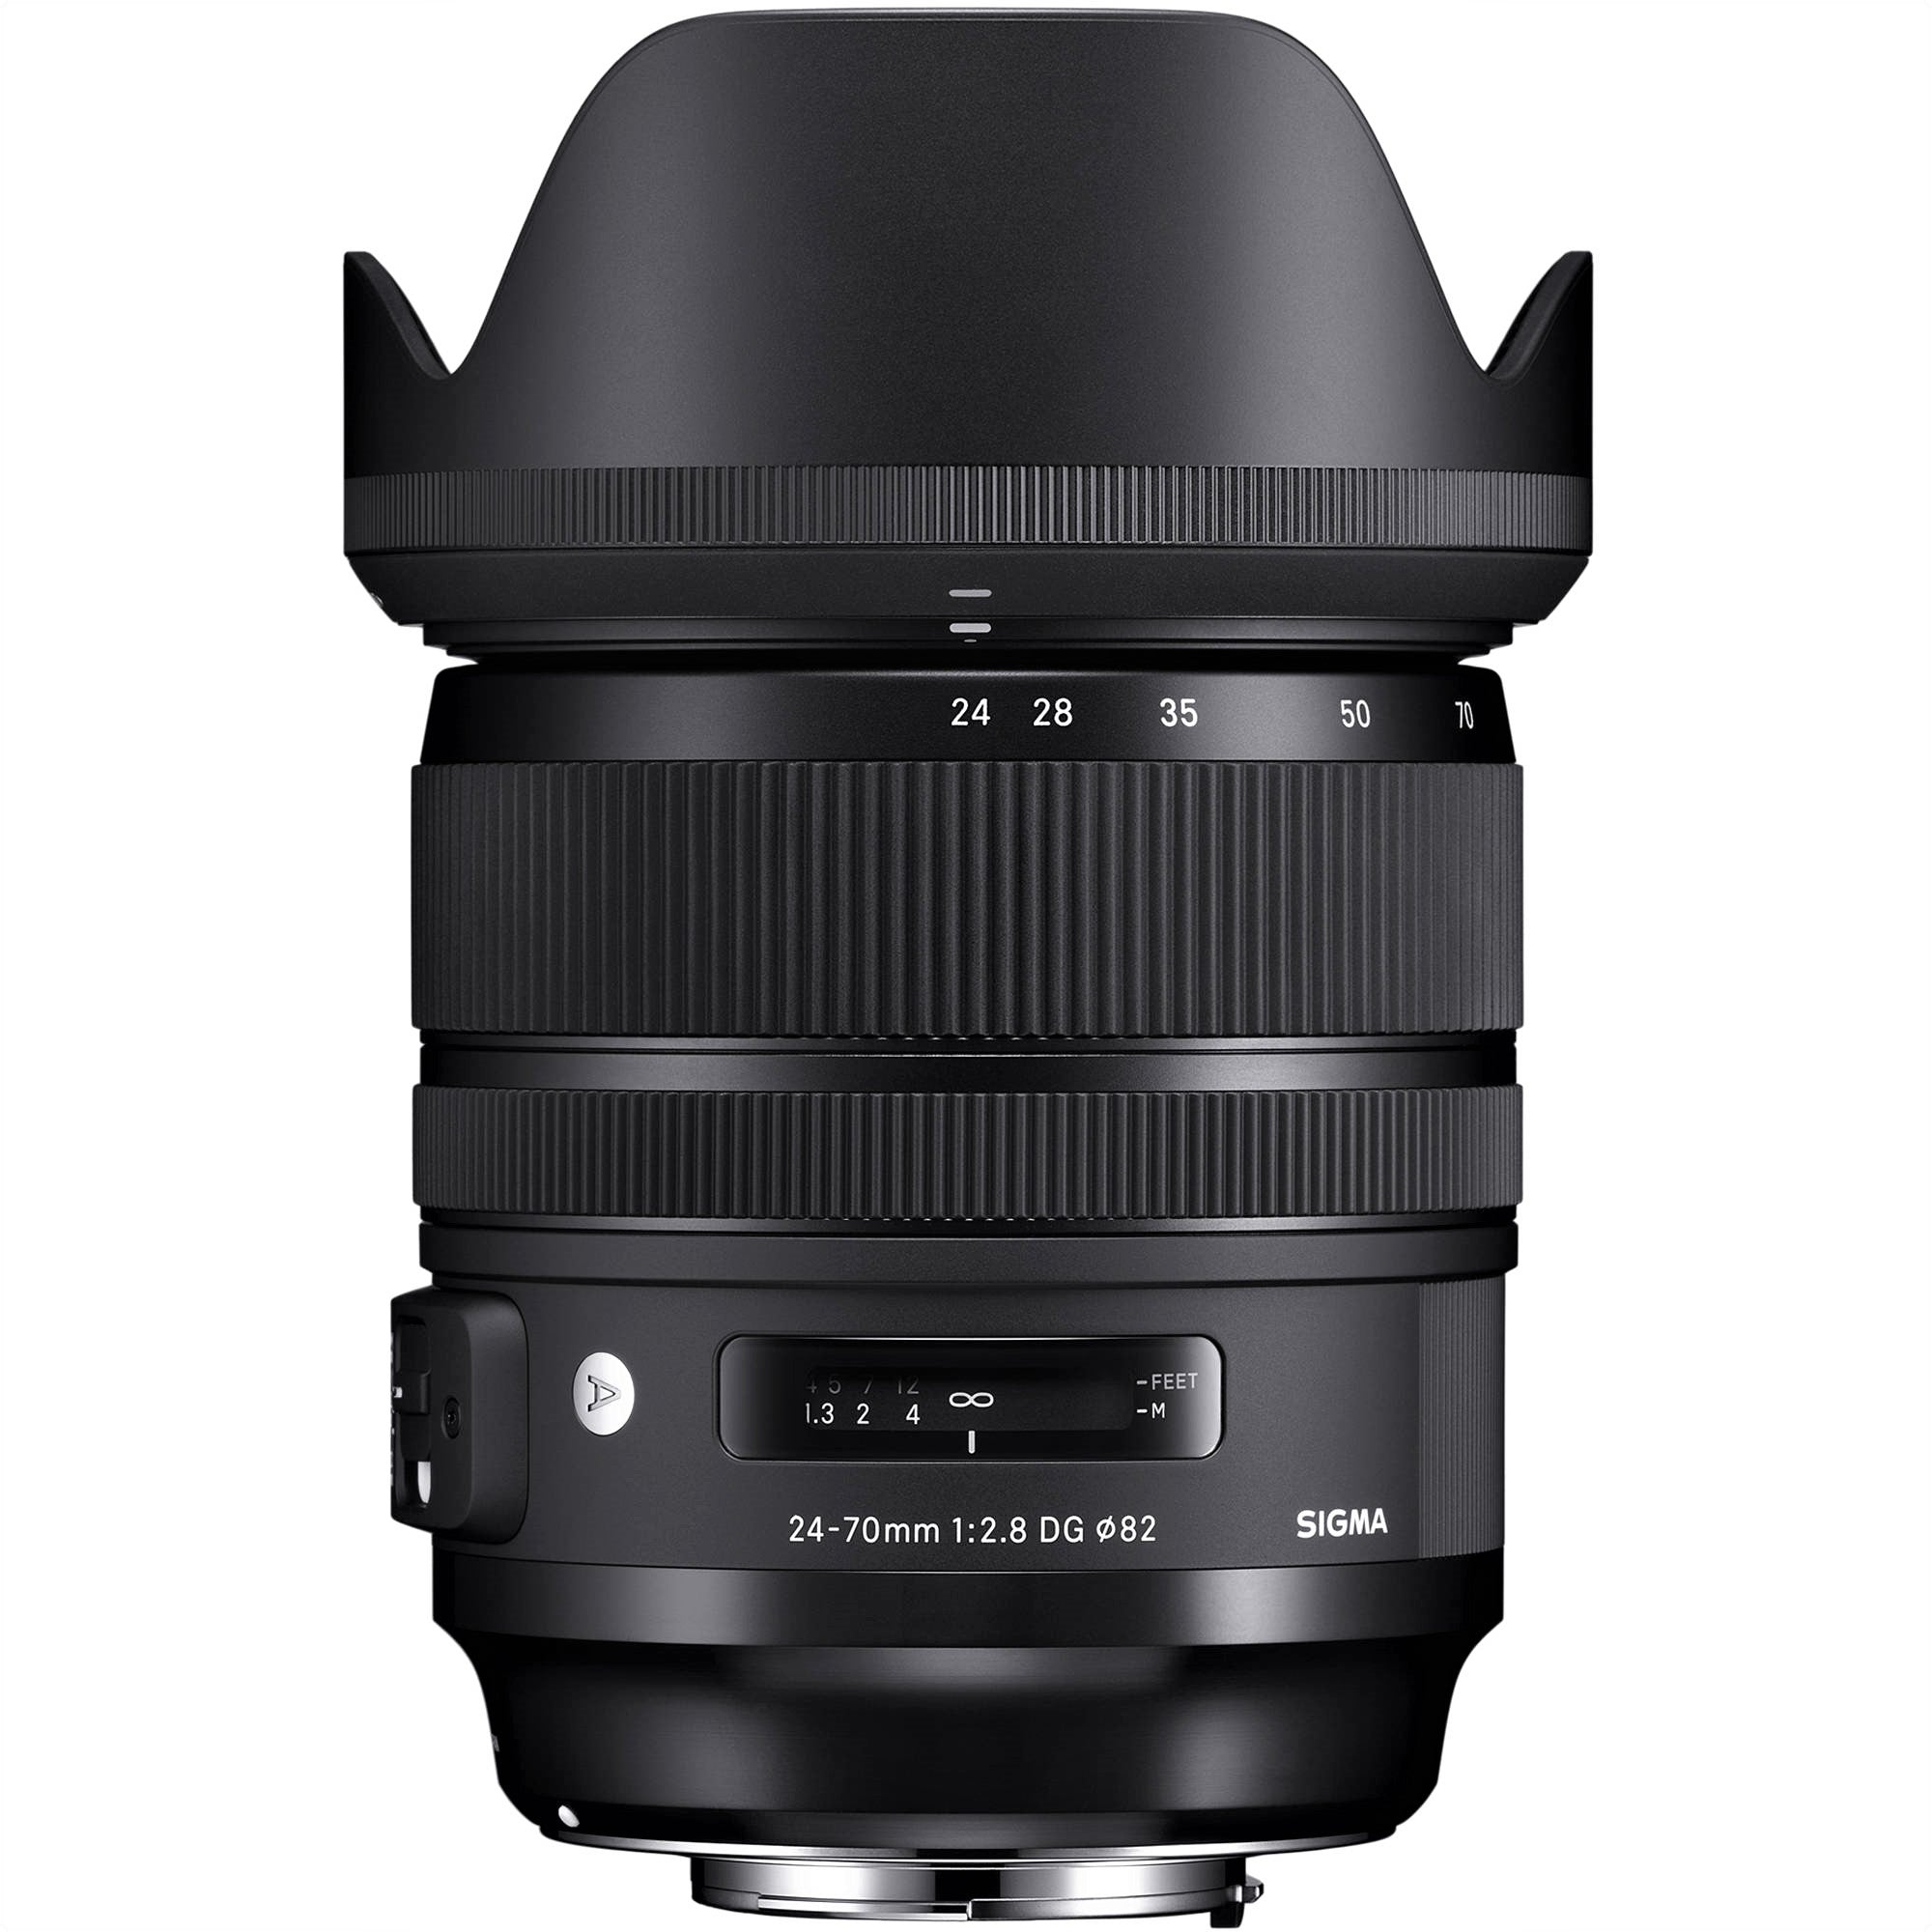 Sigma 24-70mm F2.8 DG OS HSM Art Lens for Sigma SA with Attached Lens Hood on the Top